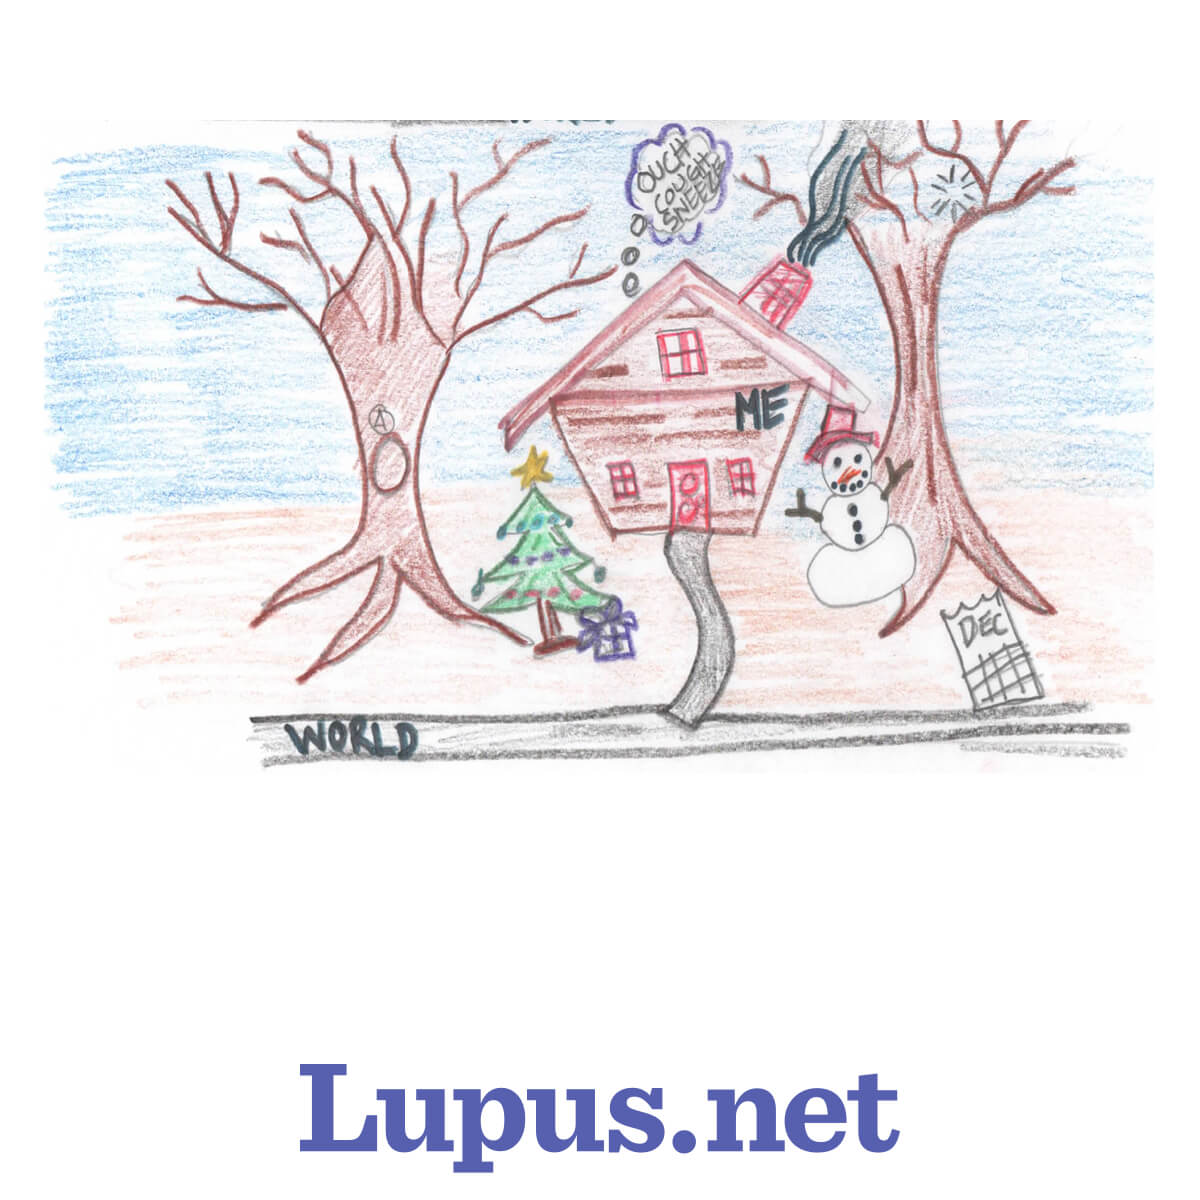 Life With Lupus Through The Seasons Comic, inside in December, coughing and sneezing in pain